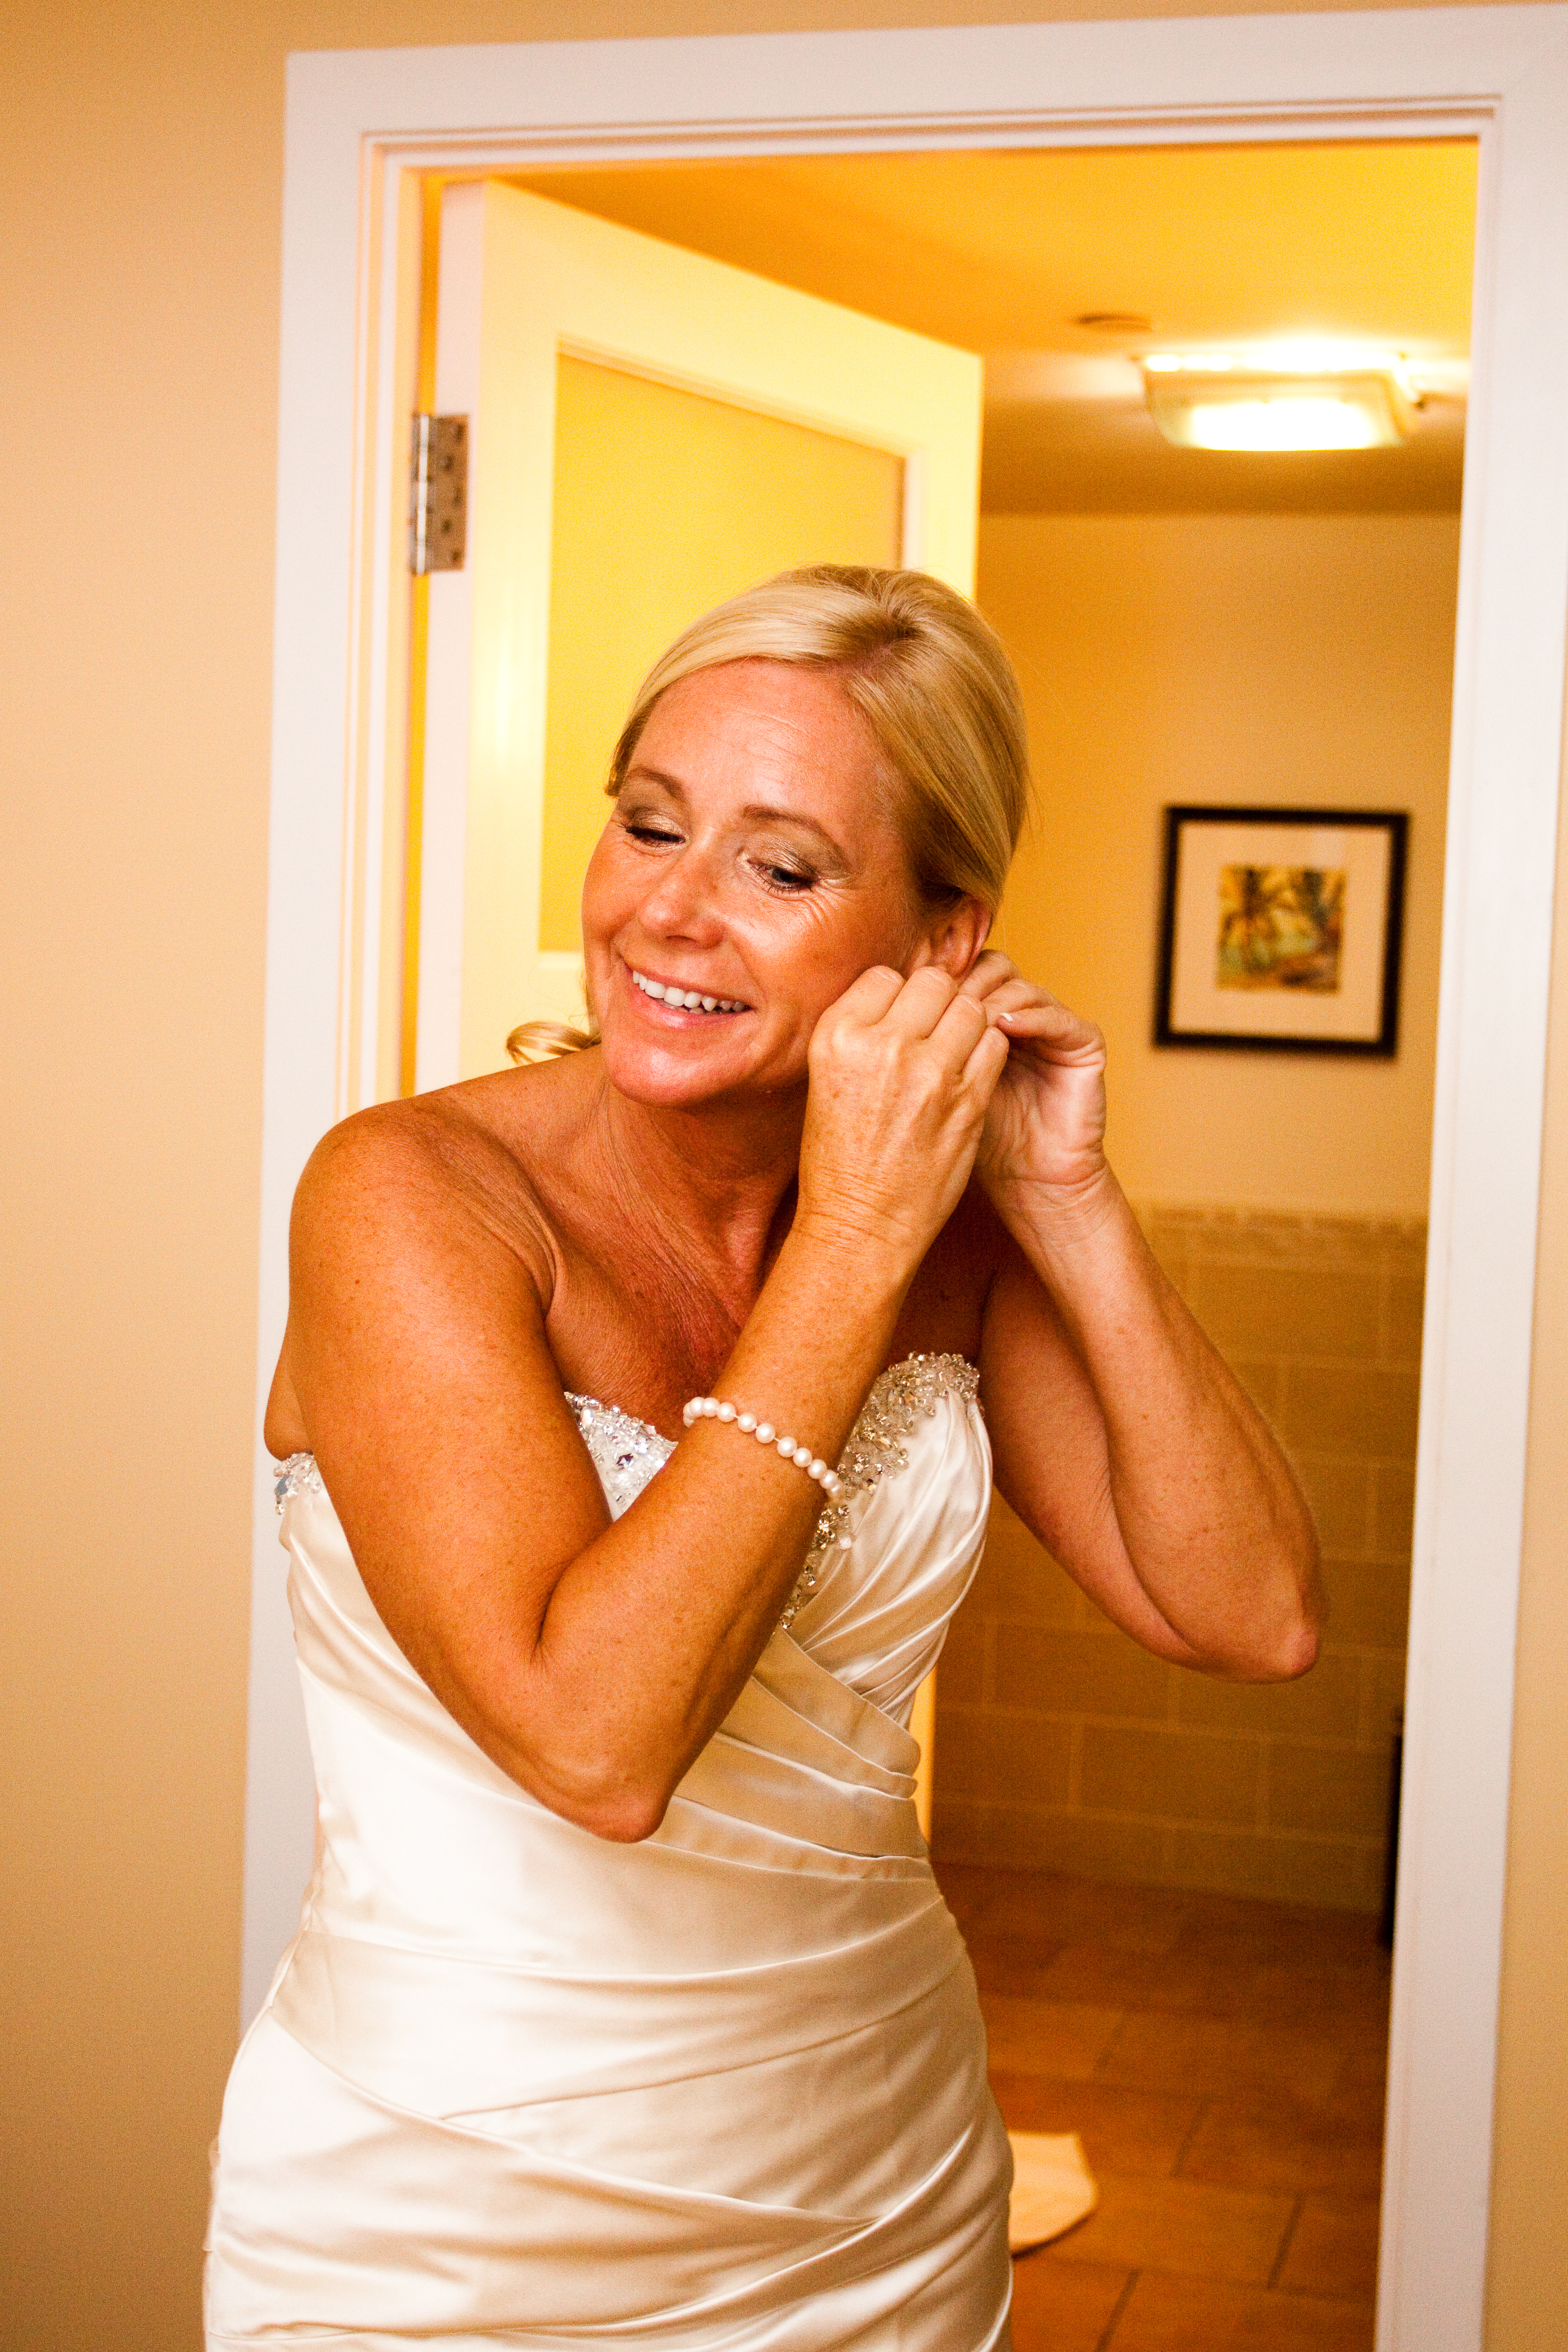 Bride getting ready for the big day